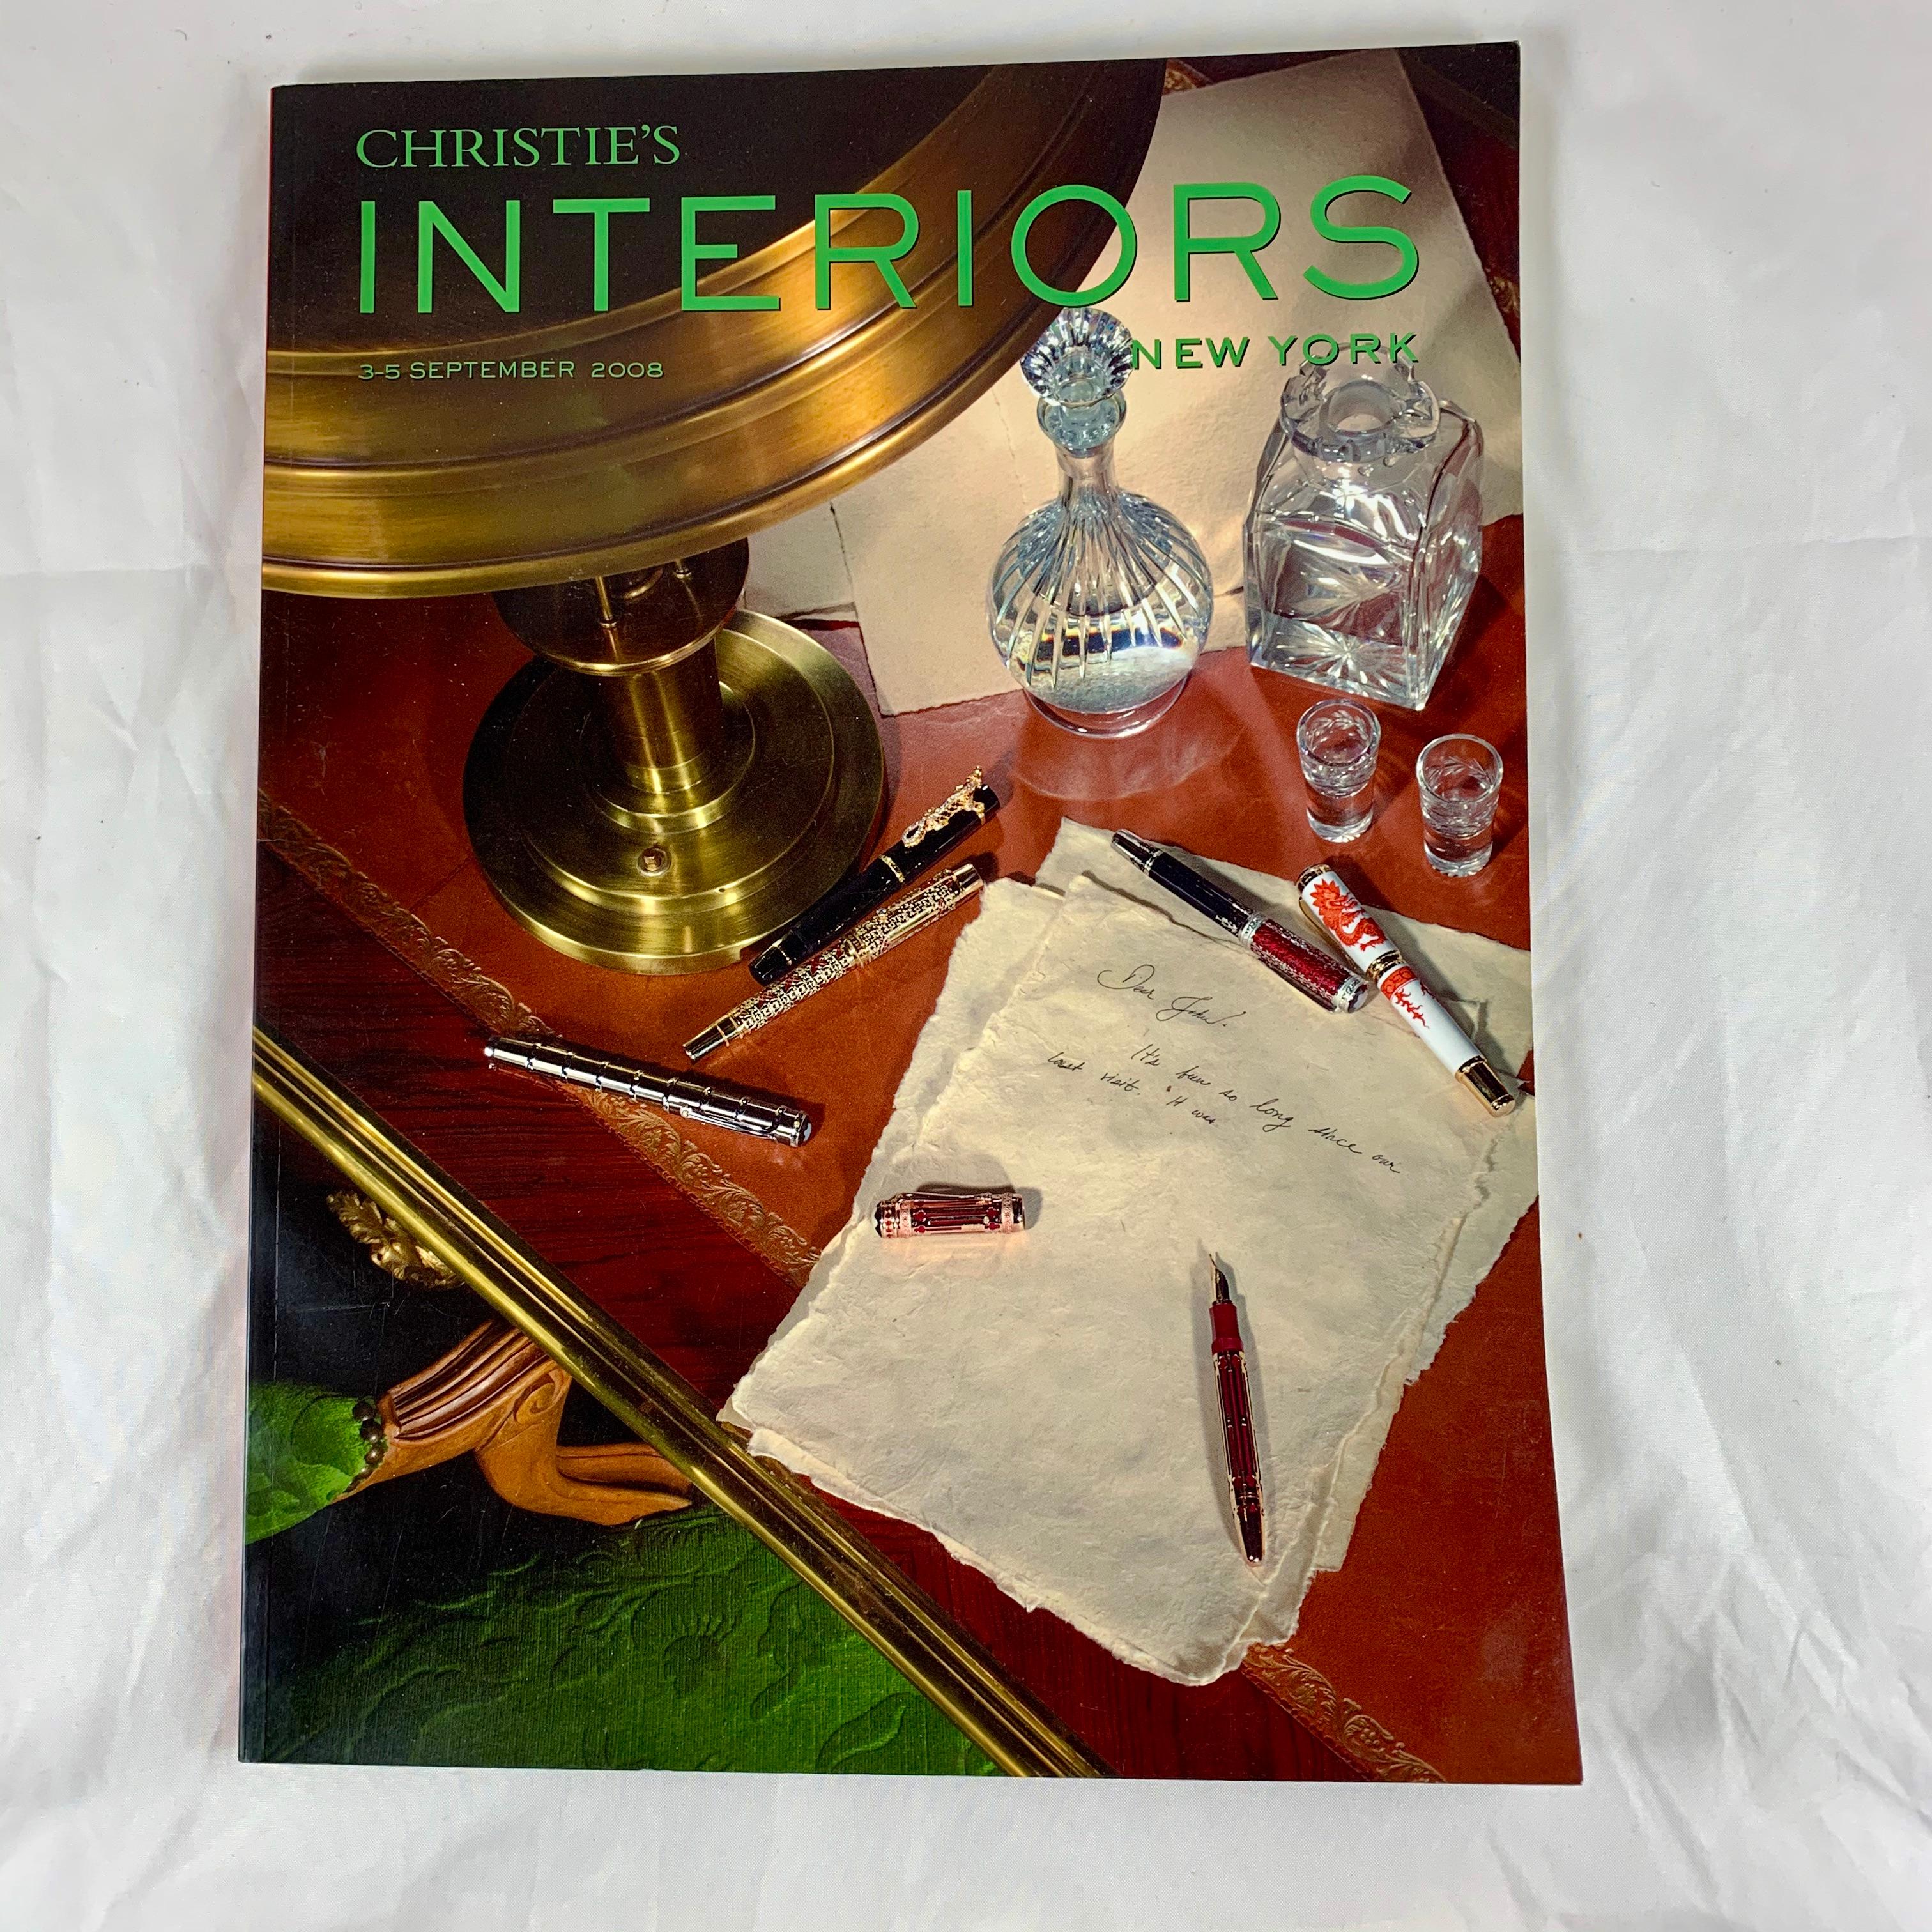 A group of three auction catalogues from the Christie's New York 'Interiors' sales.

The Interior sale catalogues are noted for their in-depth writings and beautiful full-color photography. The featured articles cover Chinese Snuff Bottles,